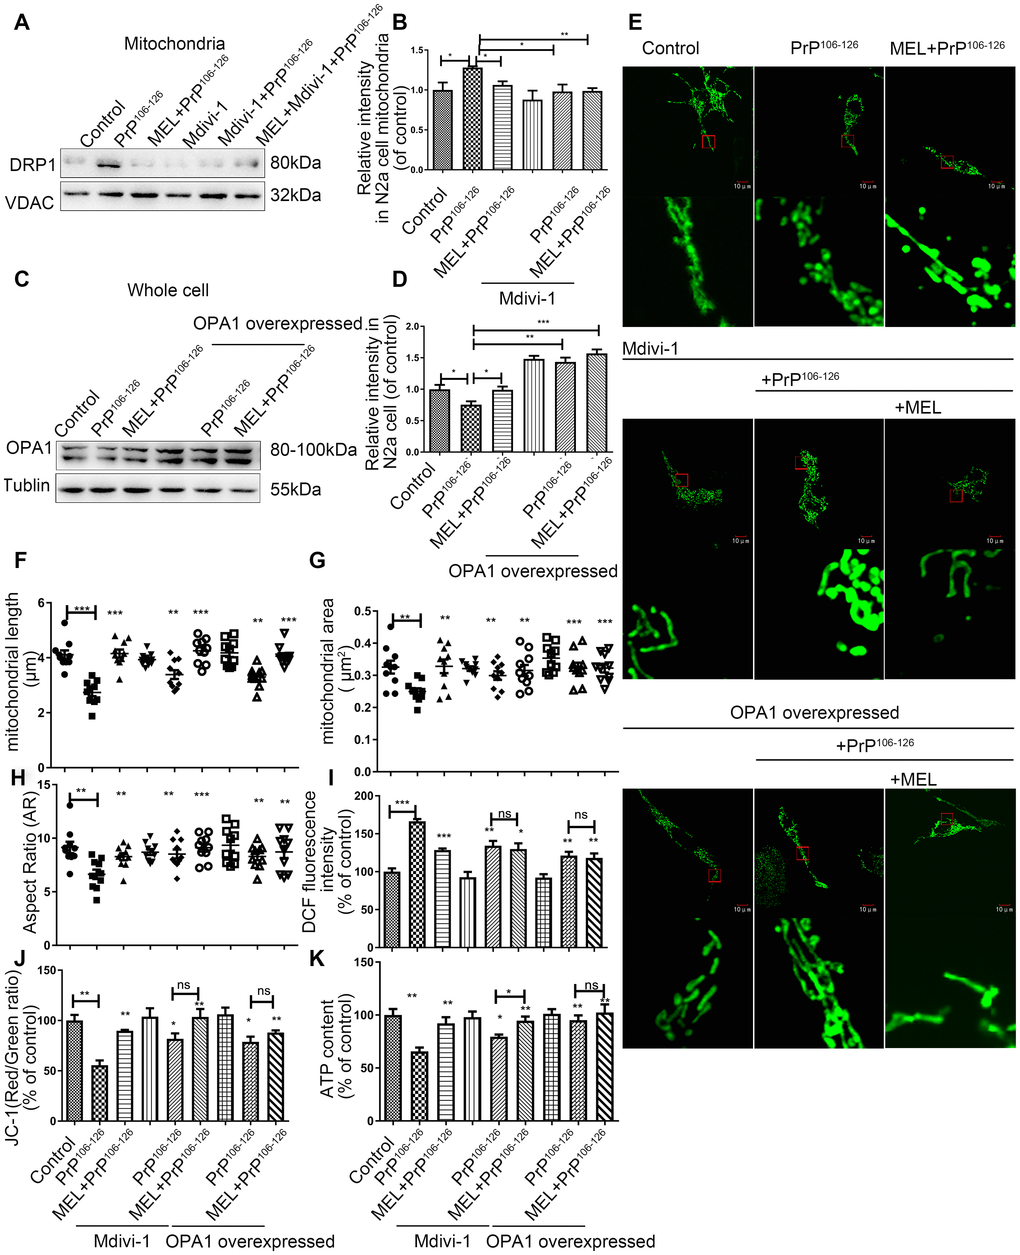 Melatonin and mitochondrial dynamic proteins regulate mitochondrial function in PrP106-126-induced prion models. (A, B) Protein levels of DRP1 in mitochondria by Western blotting. (C, D) Protein levels of OPA1 in whole cells by Western blotting. (E) Representative photomicrographs of mitochondria by confocal fluorescence microscopy showing mitochondrial morphology (Original magnification 600×). (F–H) Morphometric measurement of mitochondria. (I–K) Mitochondrial function - ROS production (J), mitochondrial membrane potential (MMP) (K) and ATP levels. *P 106-126 group. All experiments were repeated at least three times.